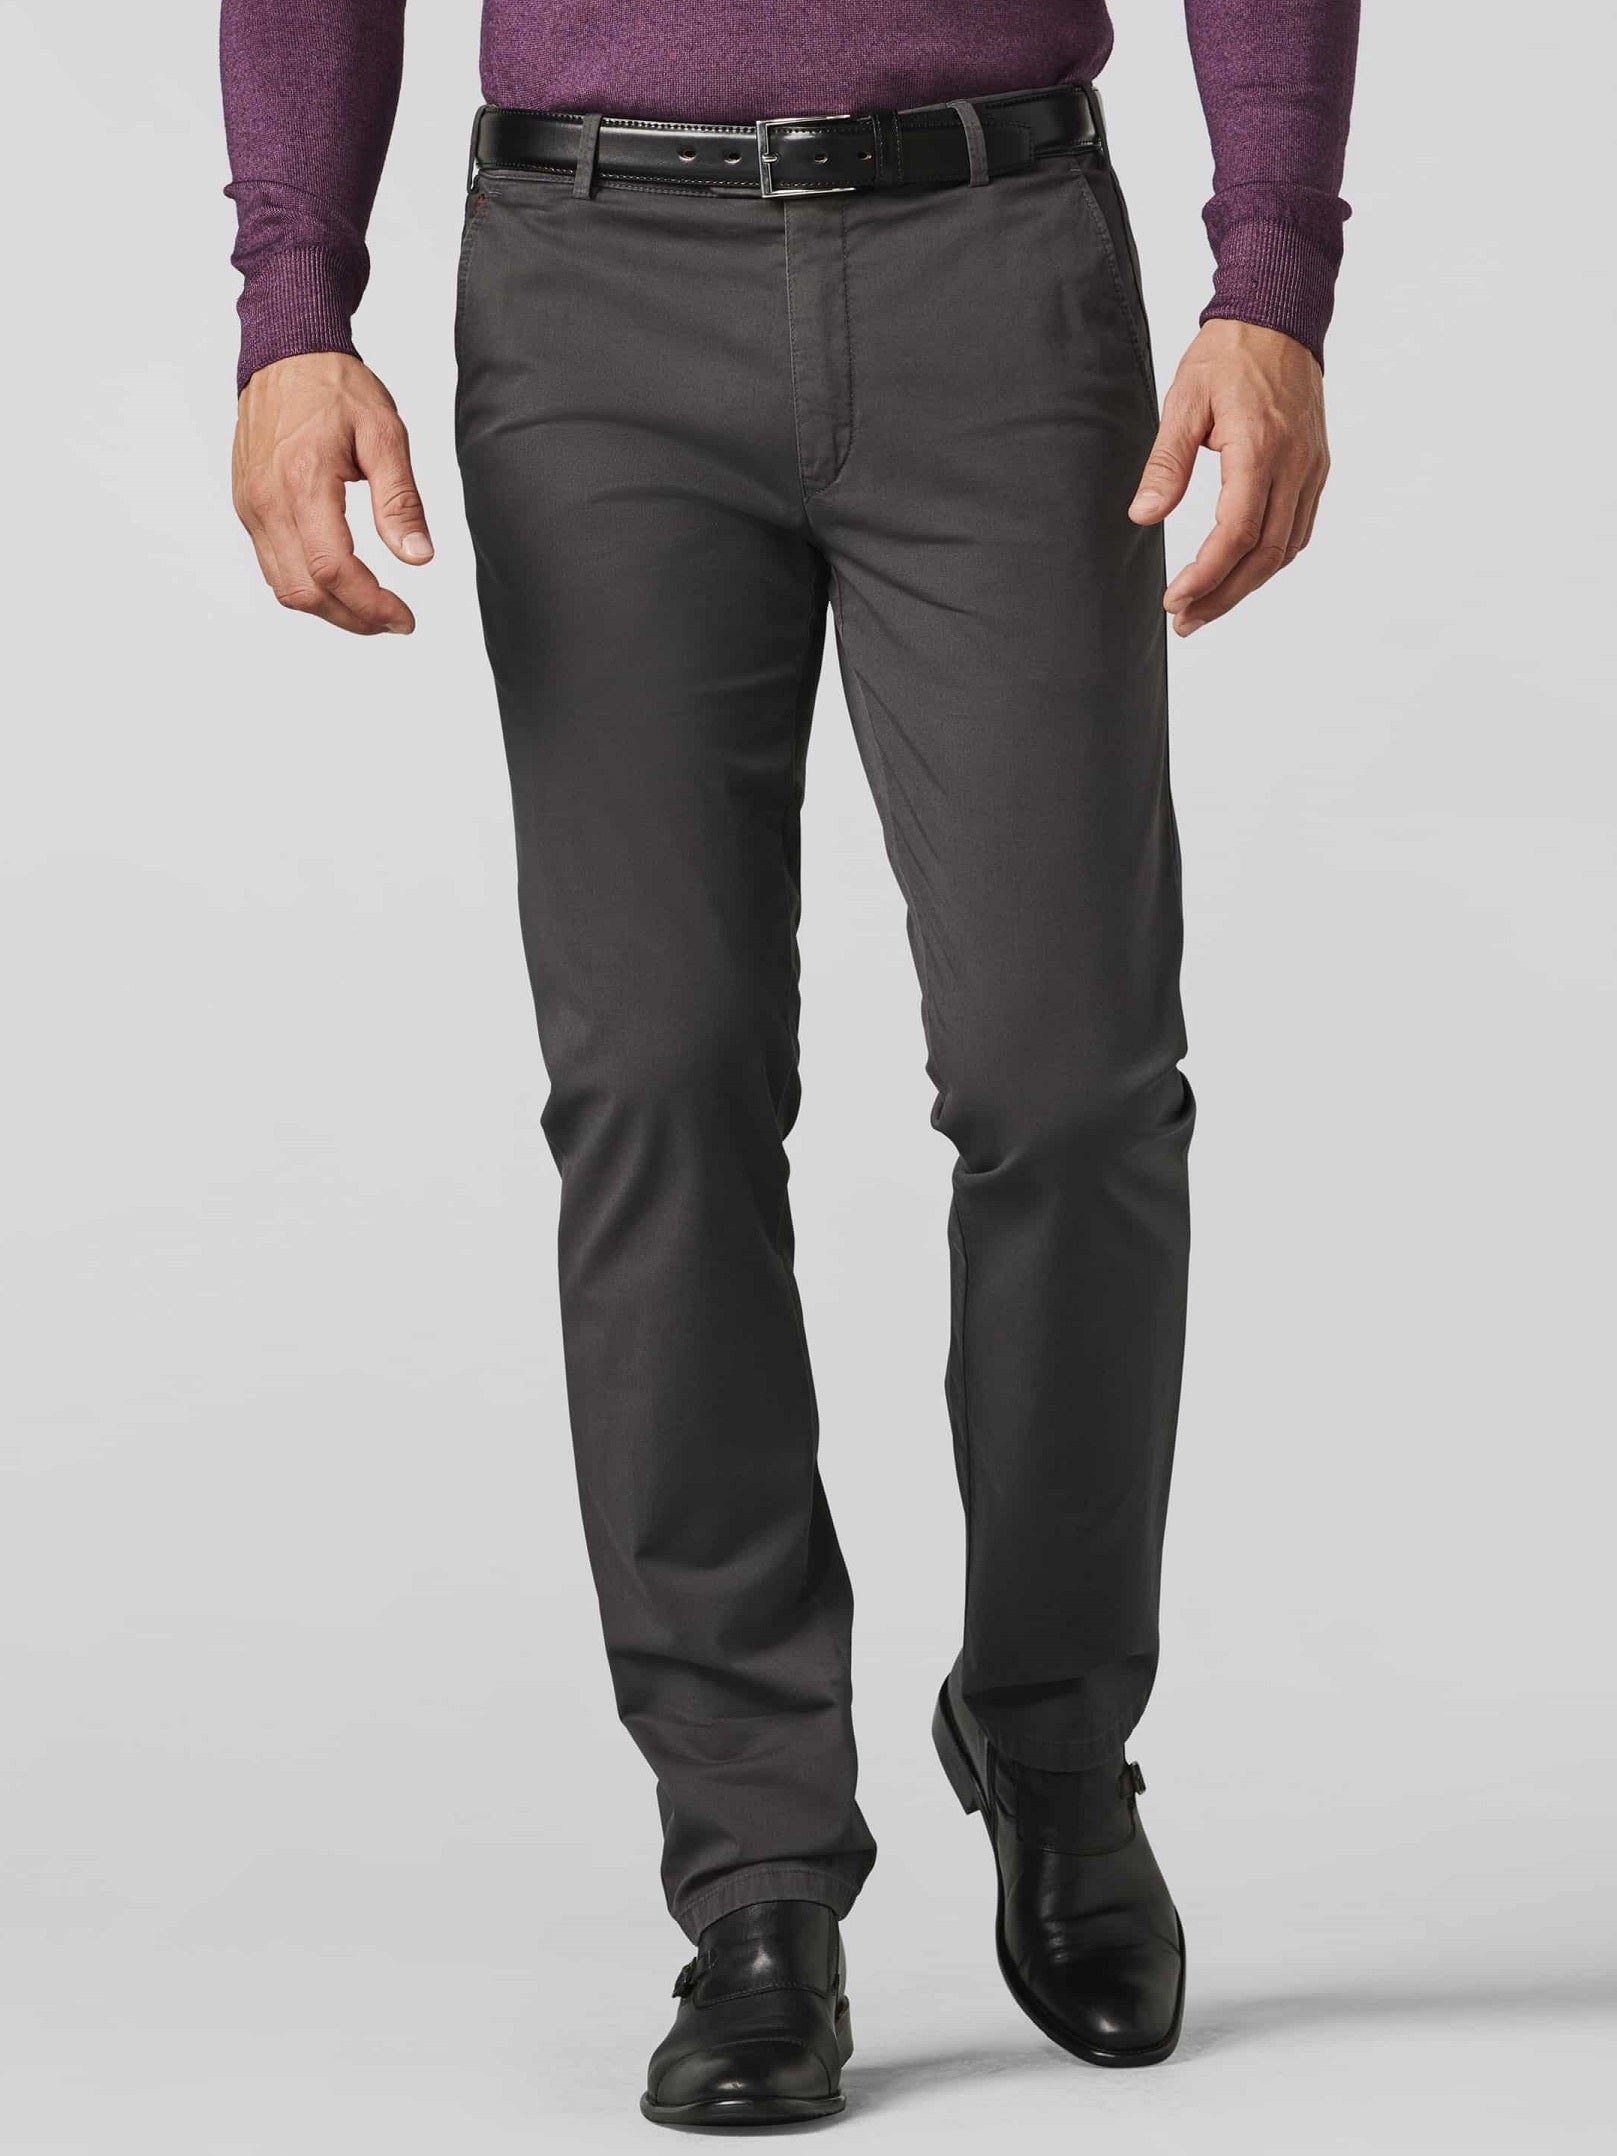 MEYER Trousers - Roma 316 Luxury Cotton Chinos - Charcoal